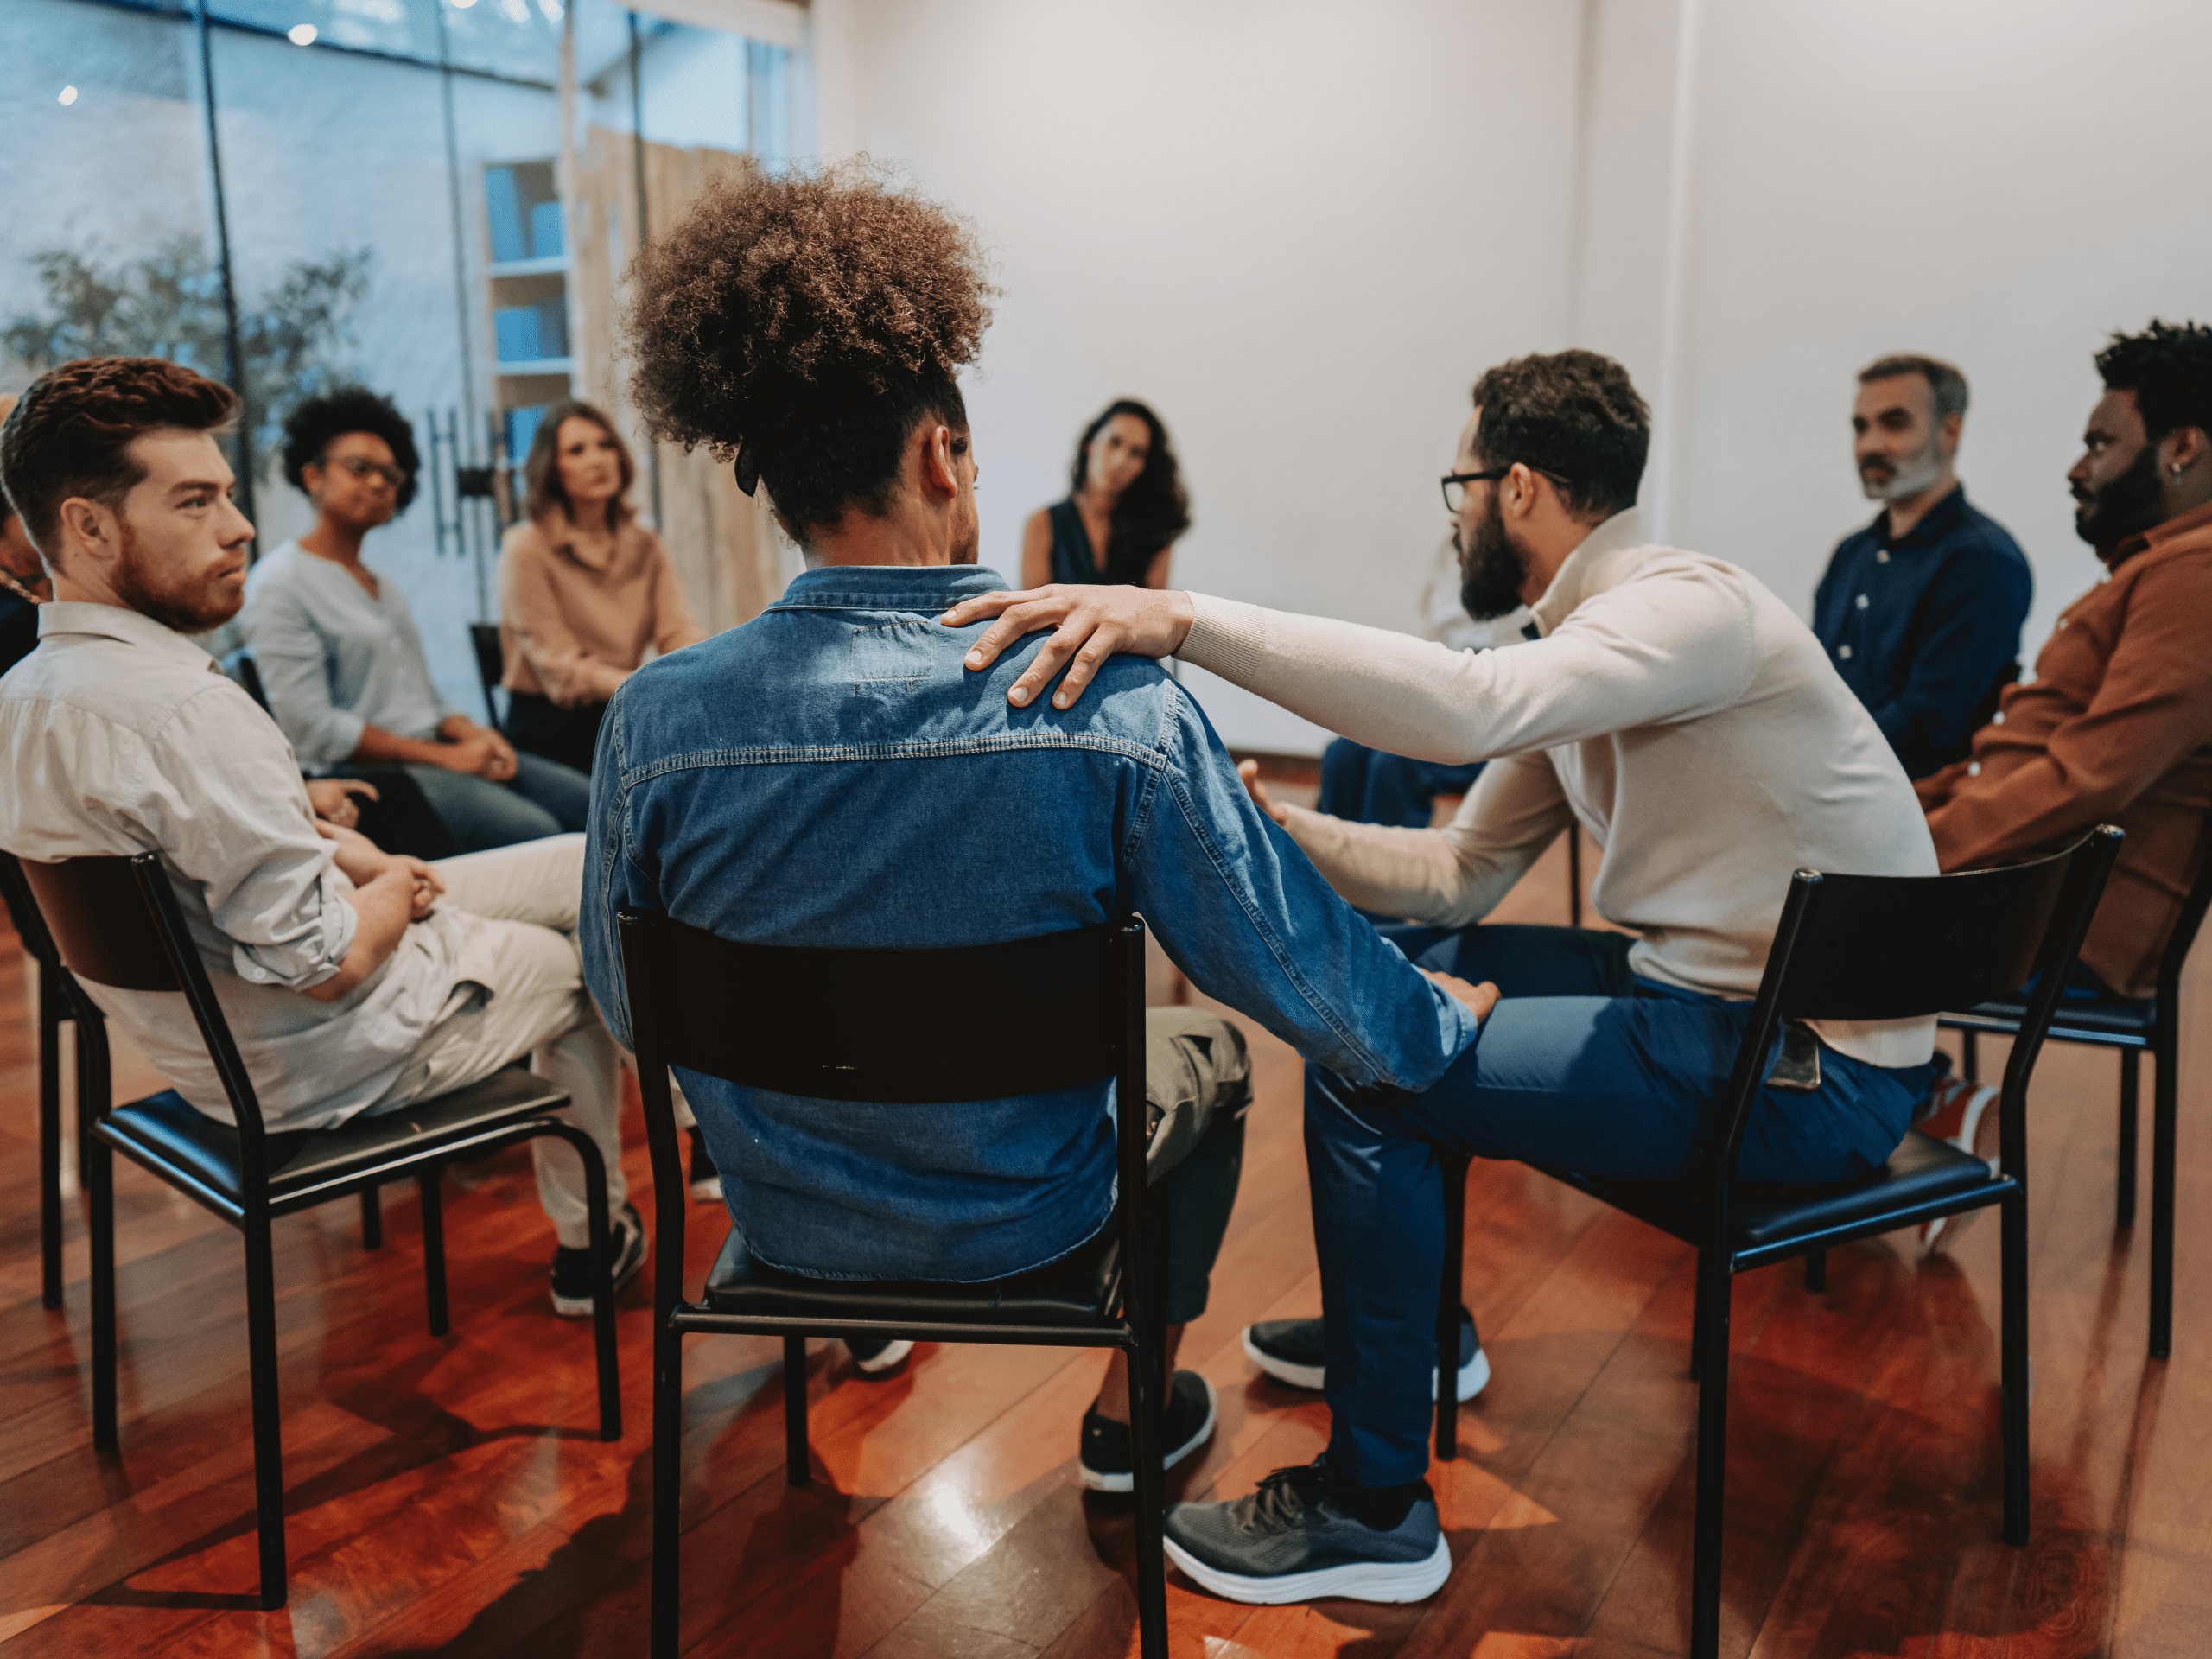 Types of Recovery Support Groups